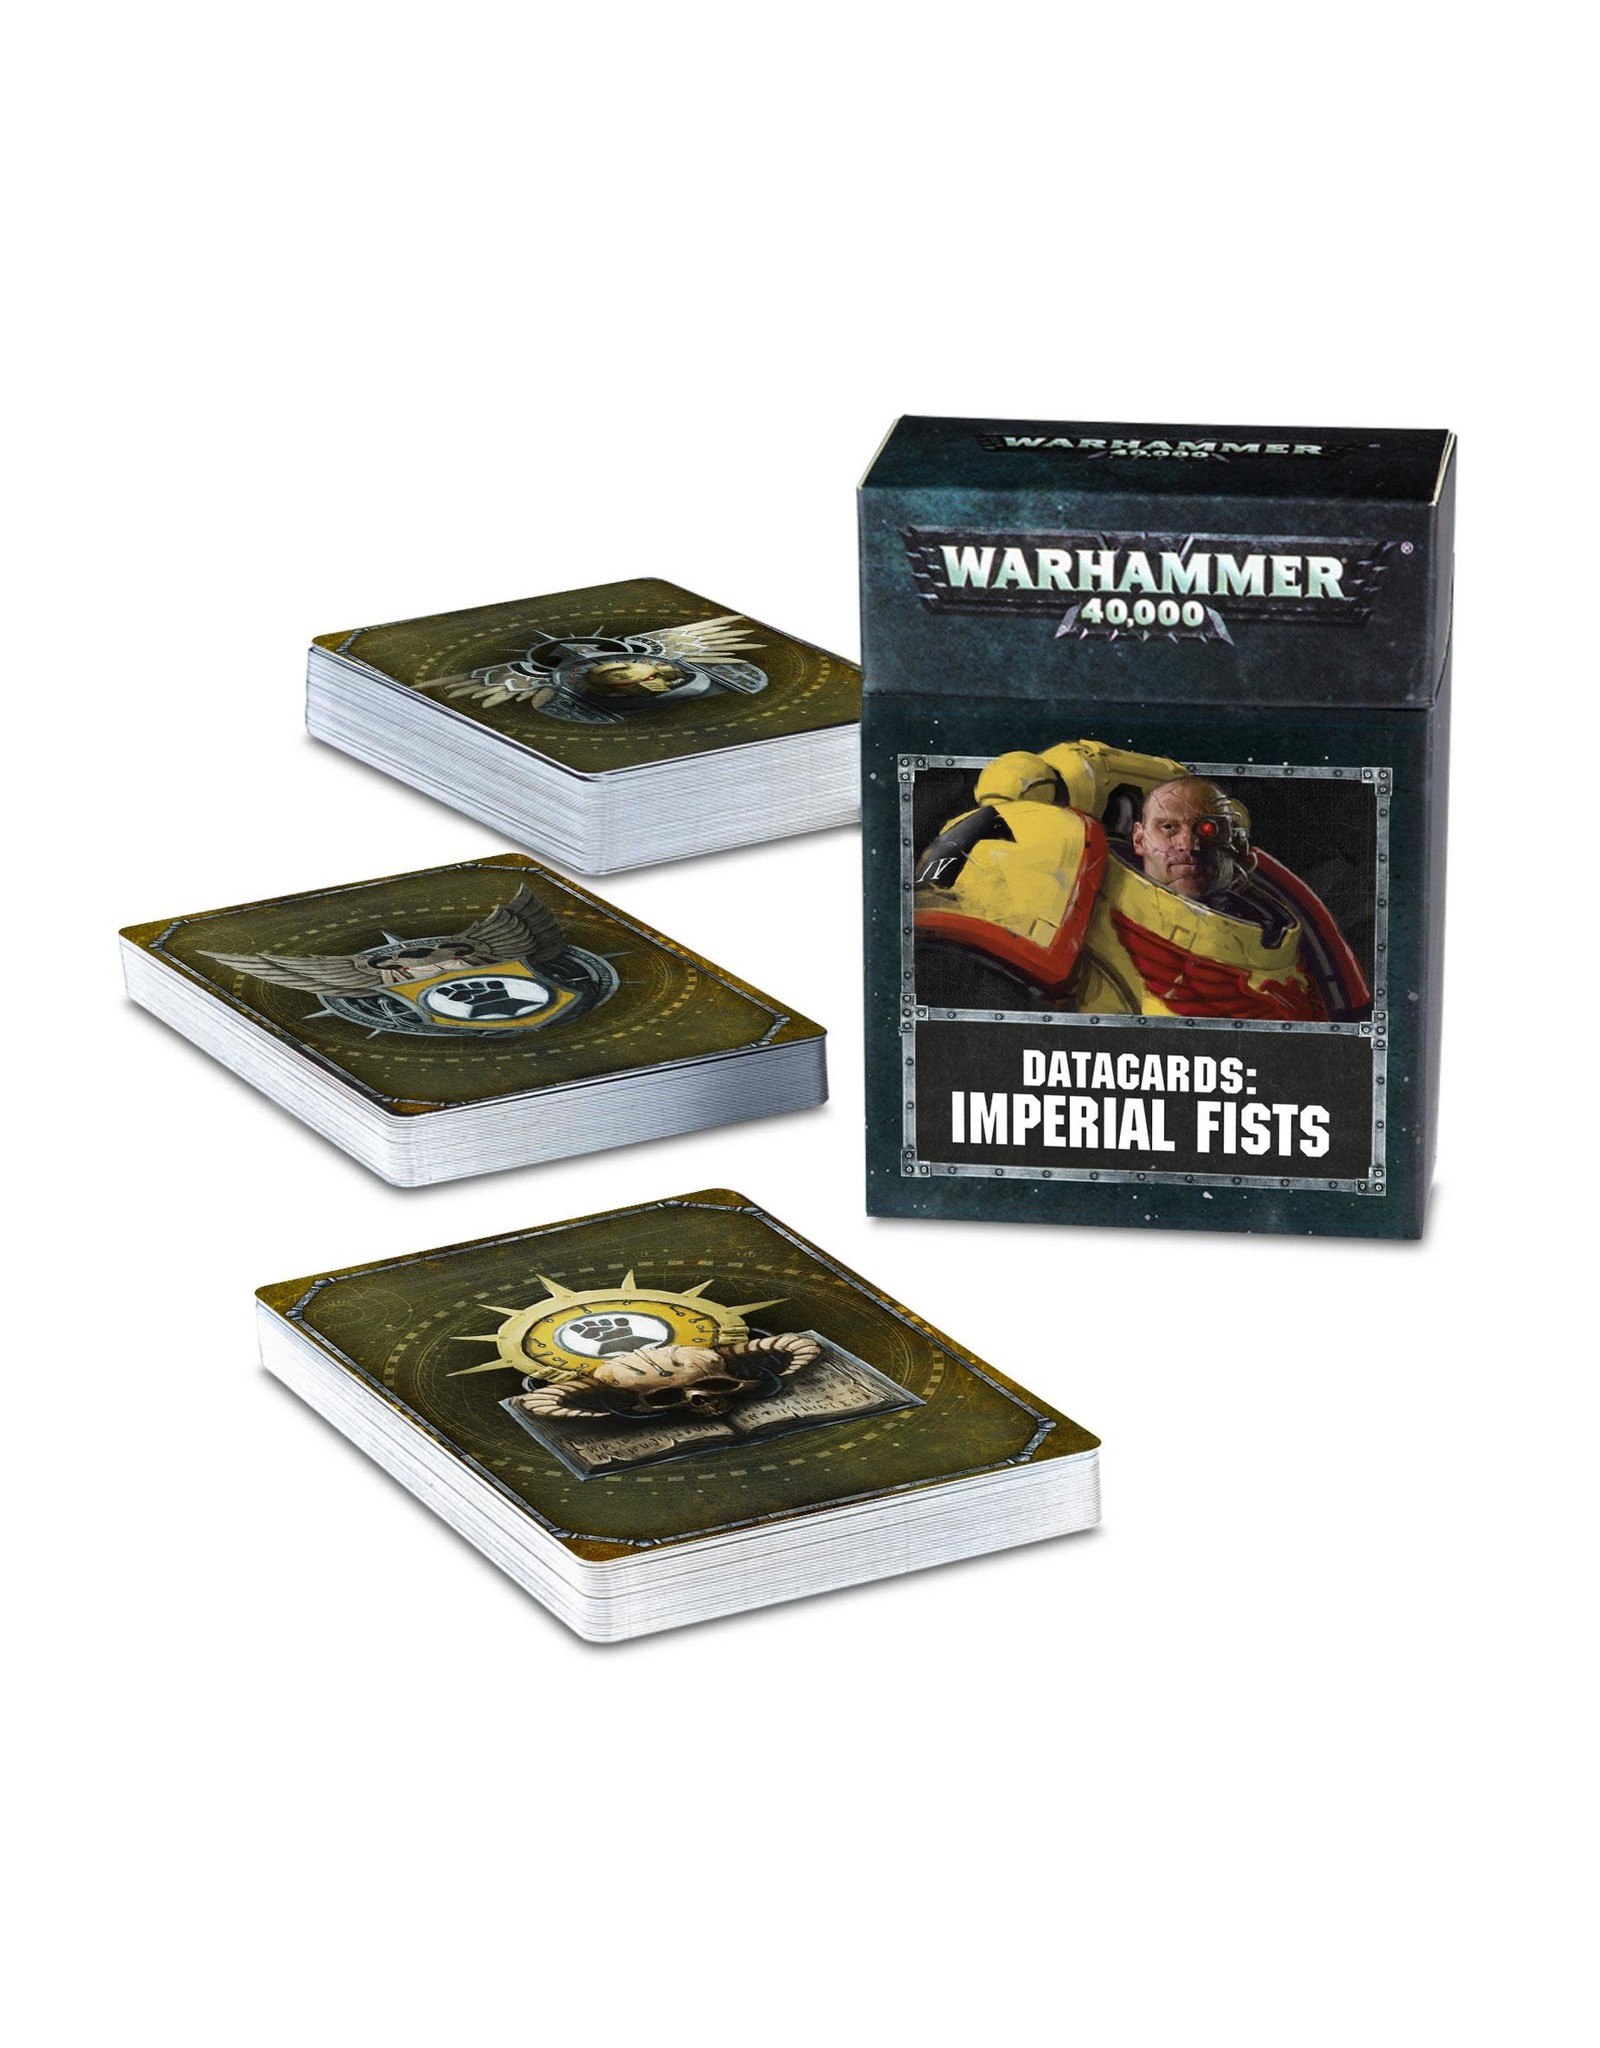 Warhammer 40k Datacards Imperial Fists